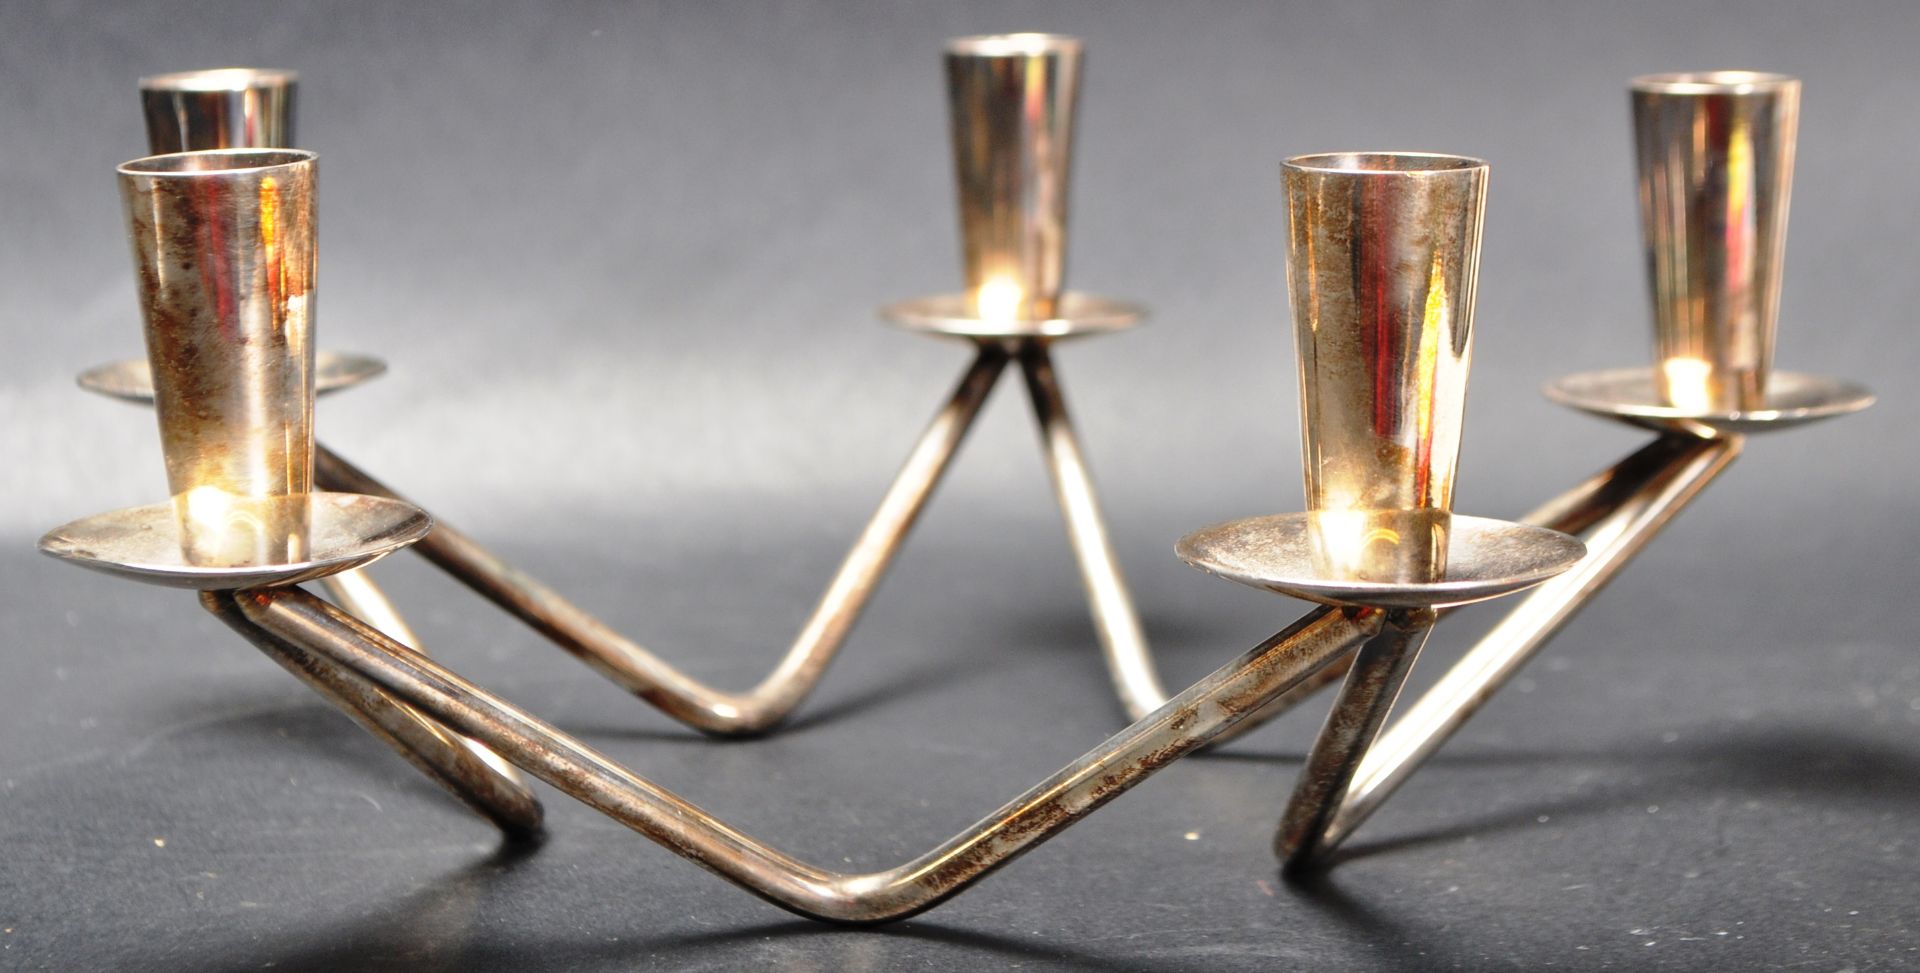 VINTAGE RETRO SILVER PLATED STAR SHAPED CANDLE HOLDER BY BREG DENMARK